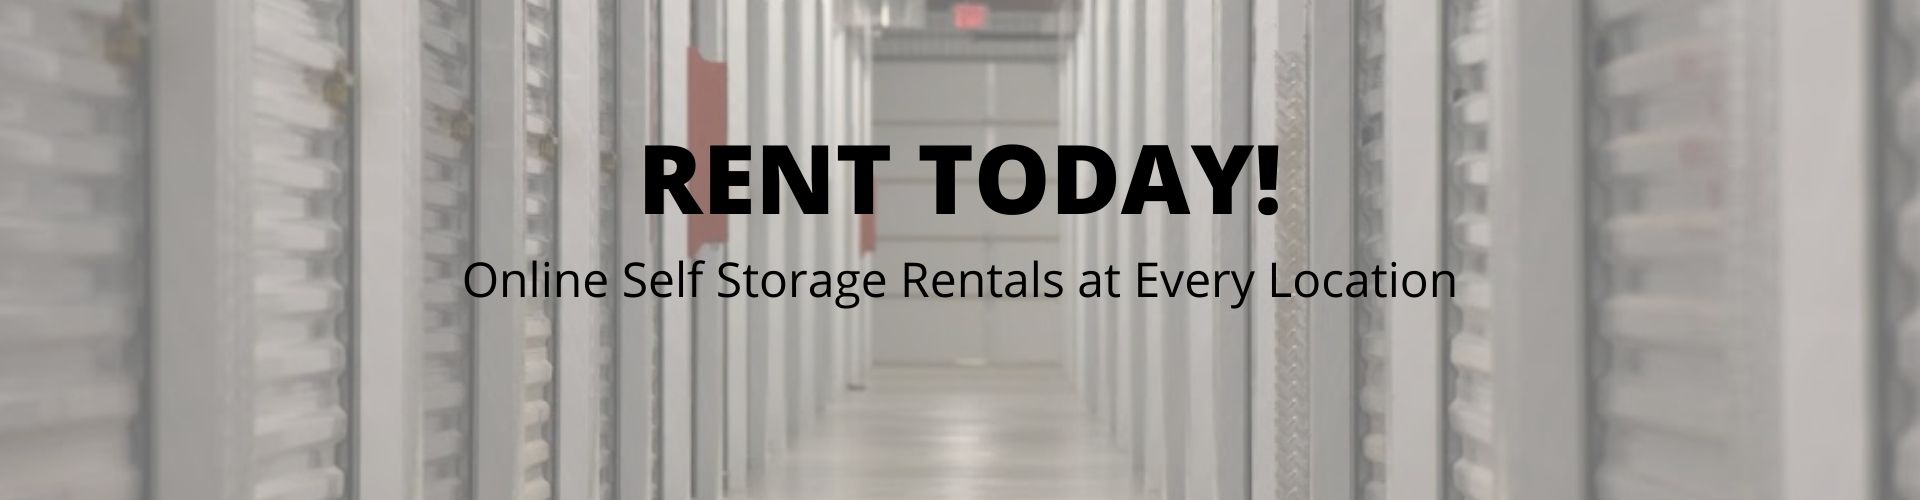 rent storage online with All Pro Storage in Canton OH